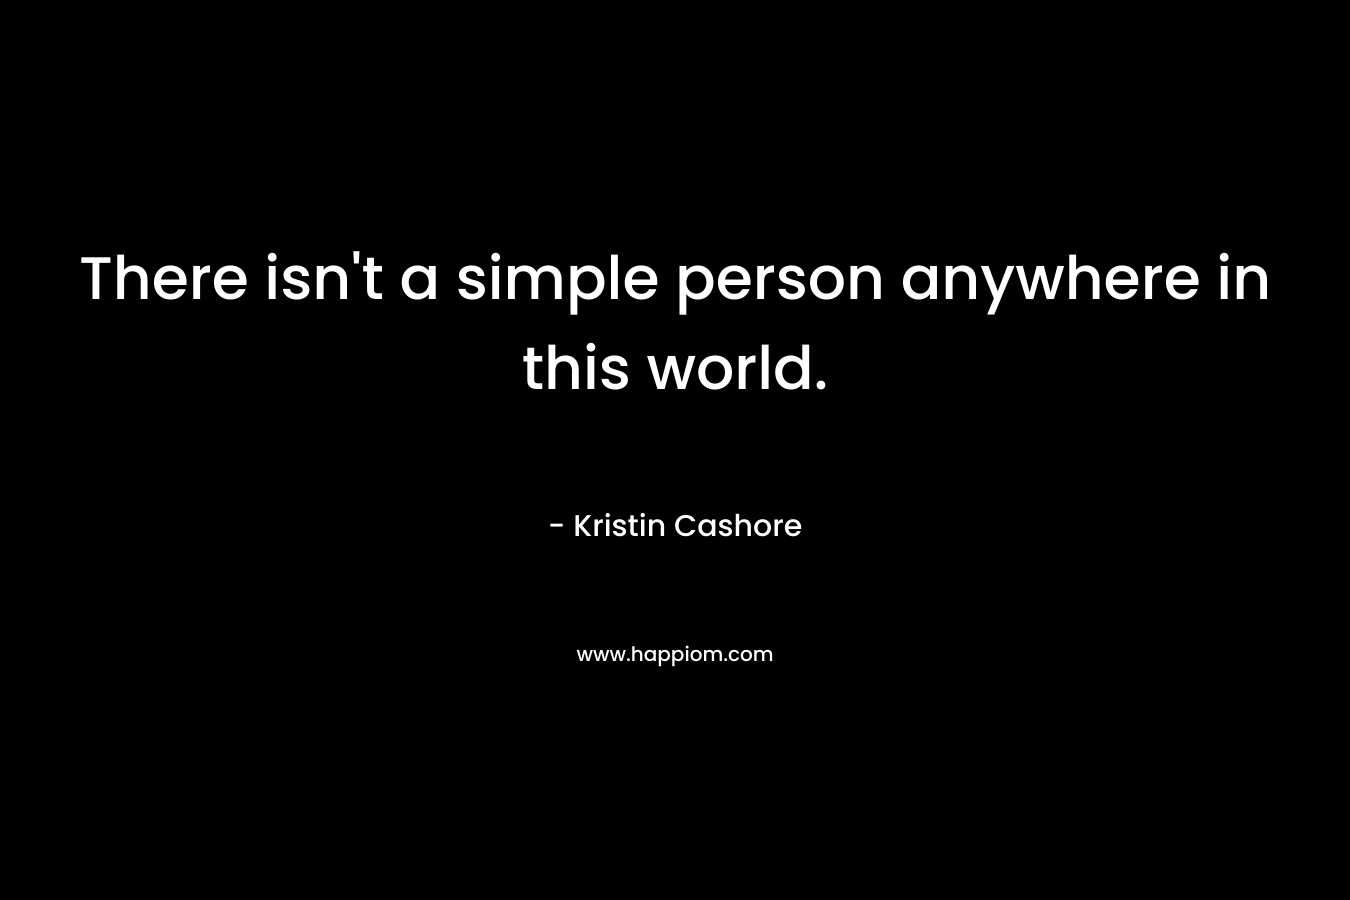 There isn’t a simple person anywhere in this world. – Kristin Cashore